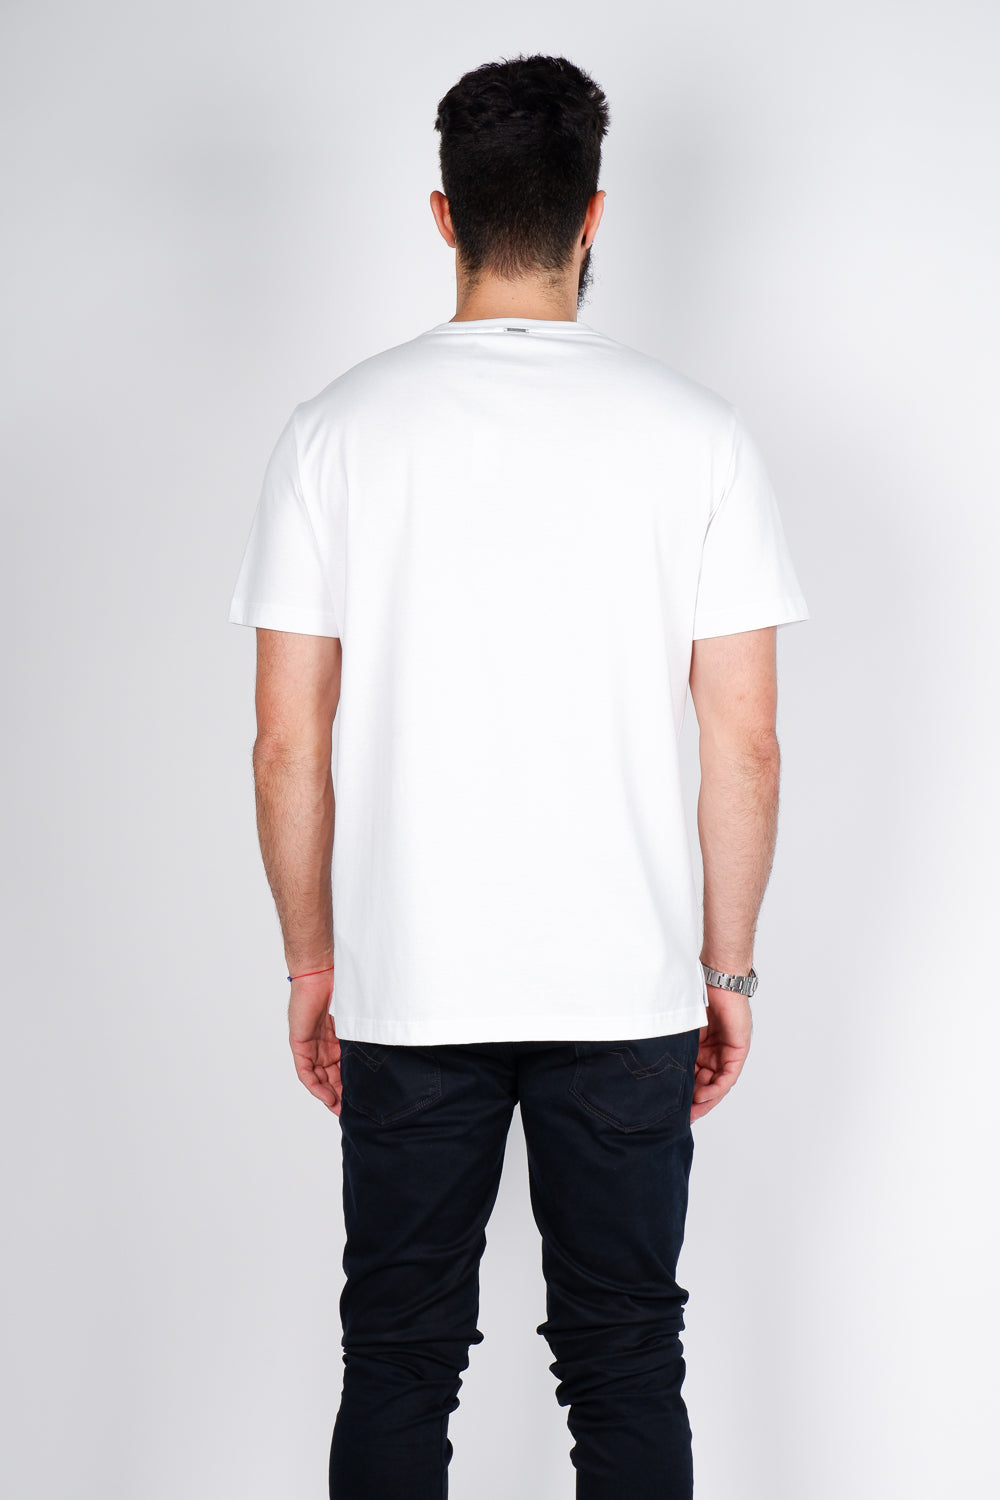 Buy the Antony Morato Taped Pocket Detail T-Shirt White at Intro. Spend £50 for free UK delivery. Official stockists. We ship worldwide.